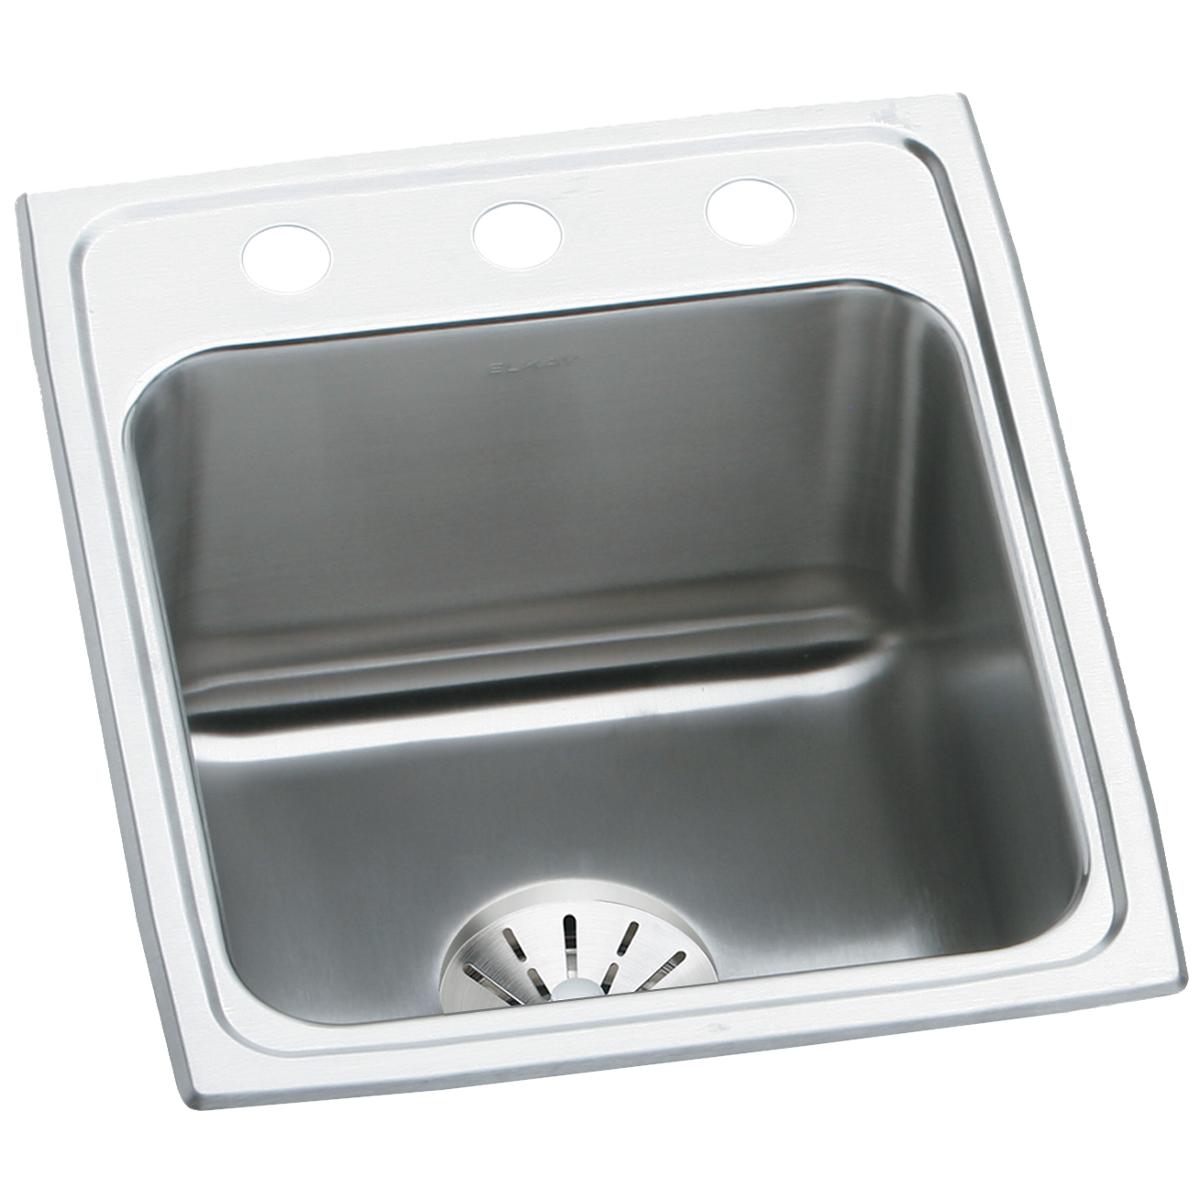 Elkay Lustertone Classic Stainless Steel 17" x 22" x 10-1/8" Single Bowl Drop-in Sink with Perfect Drain